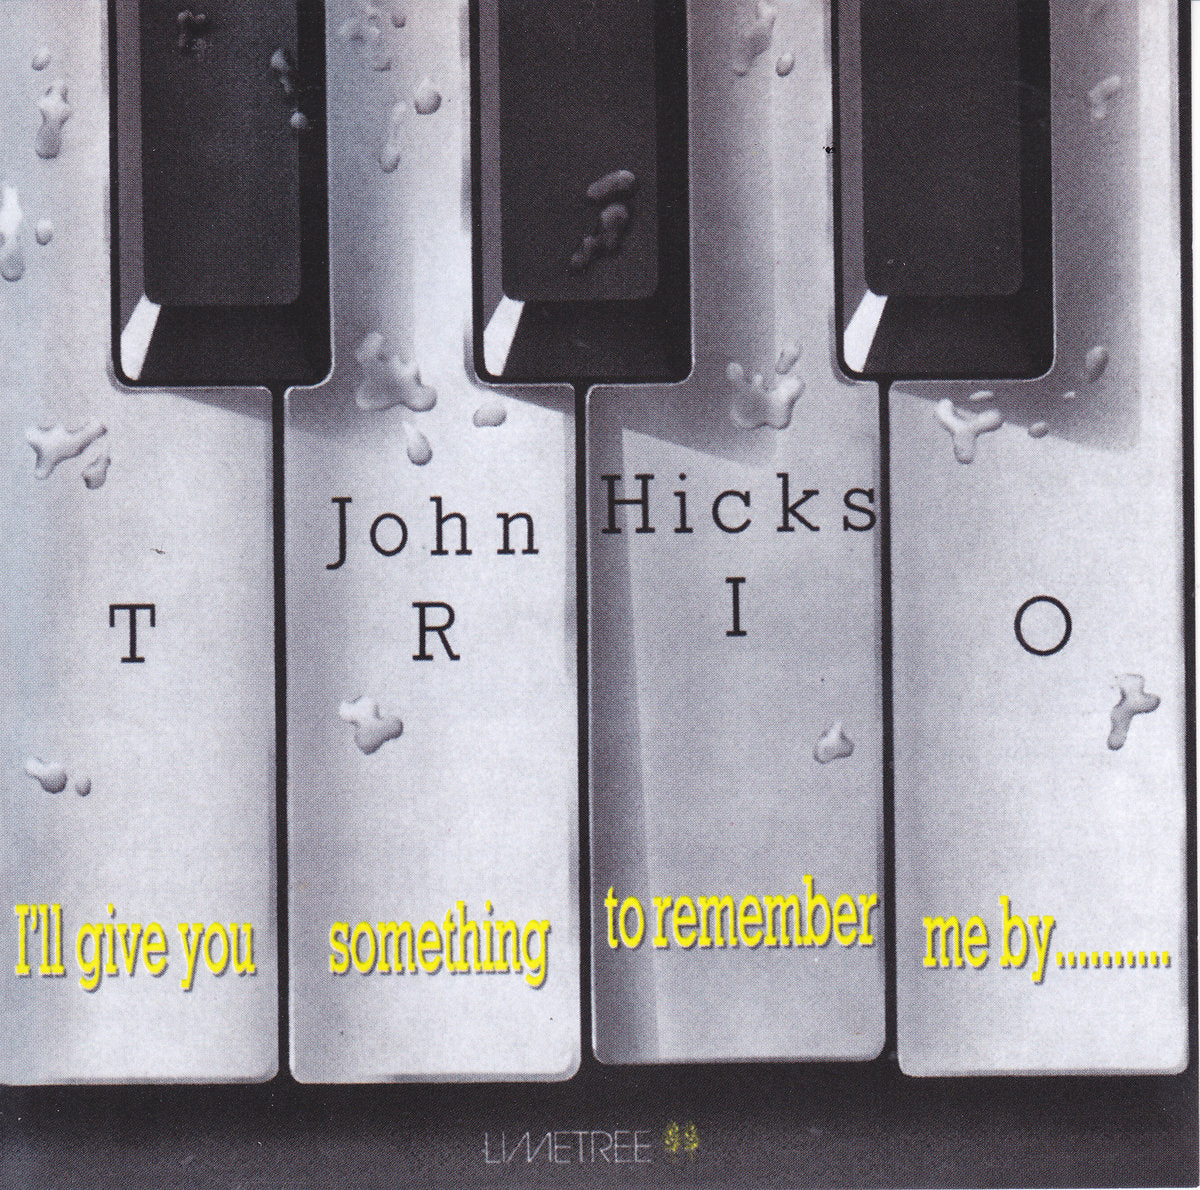 Hicks, John Trio - I'll Give You Something To Remember Me By